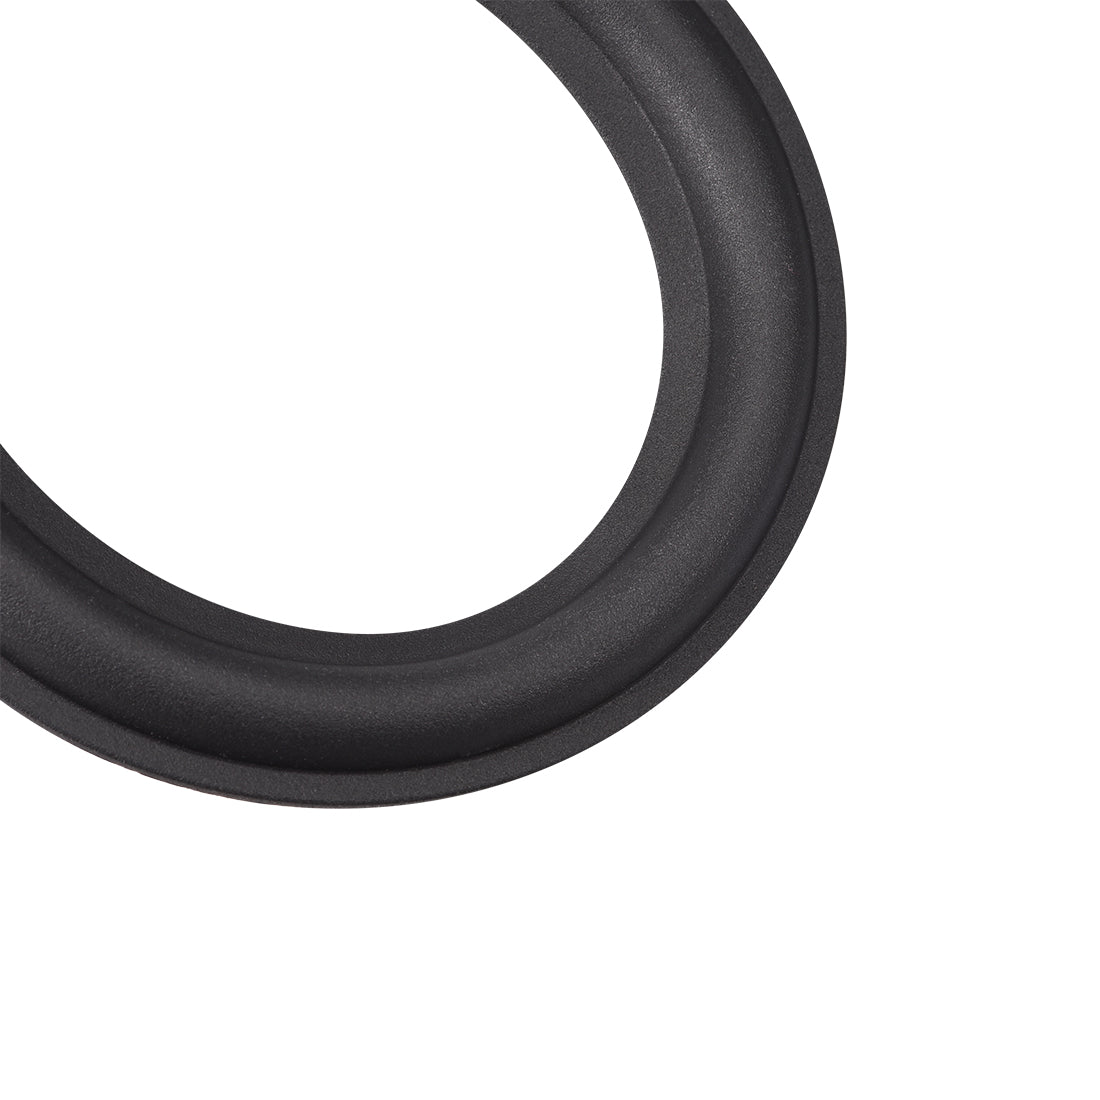 uxcell Uxcell 2.75" 2.75 inch Speaker Rubber Edge Surround Rings Replacement Part for Speaker Repair or DIY